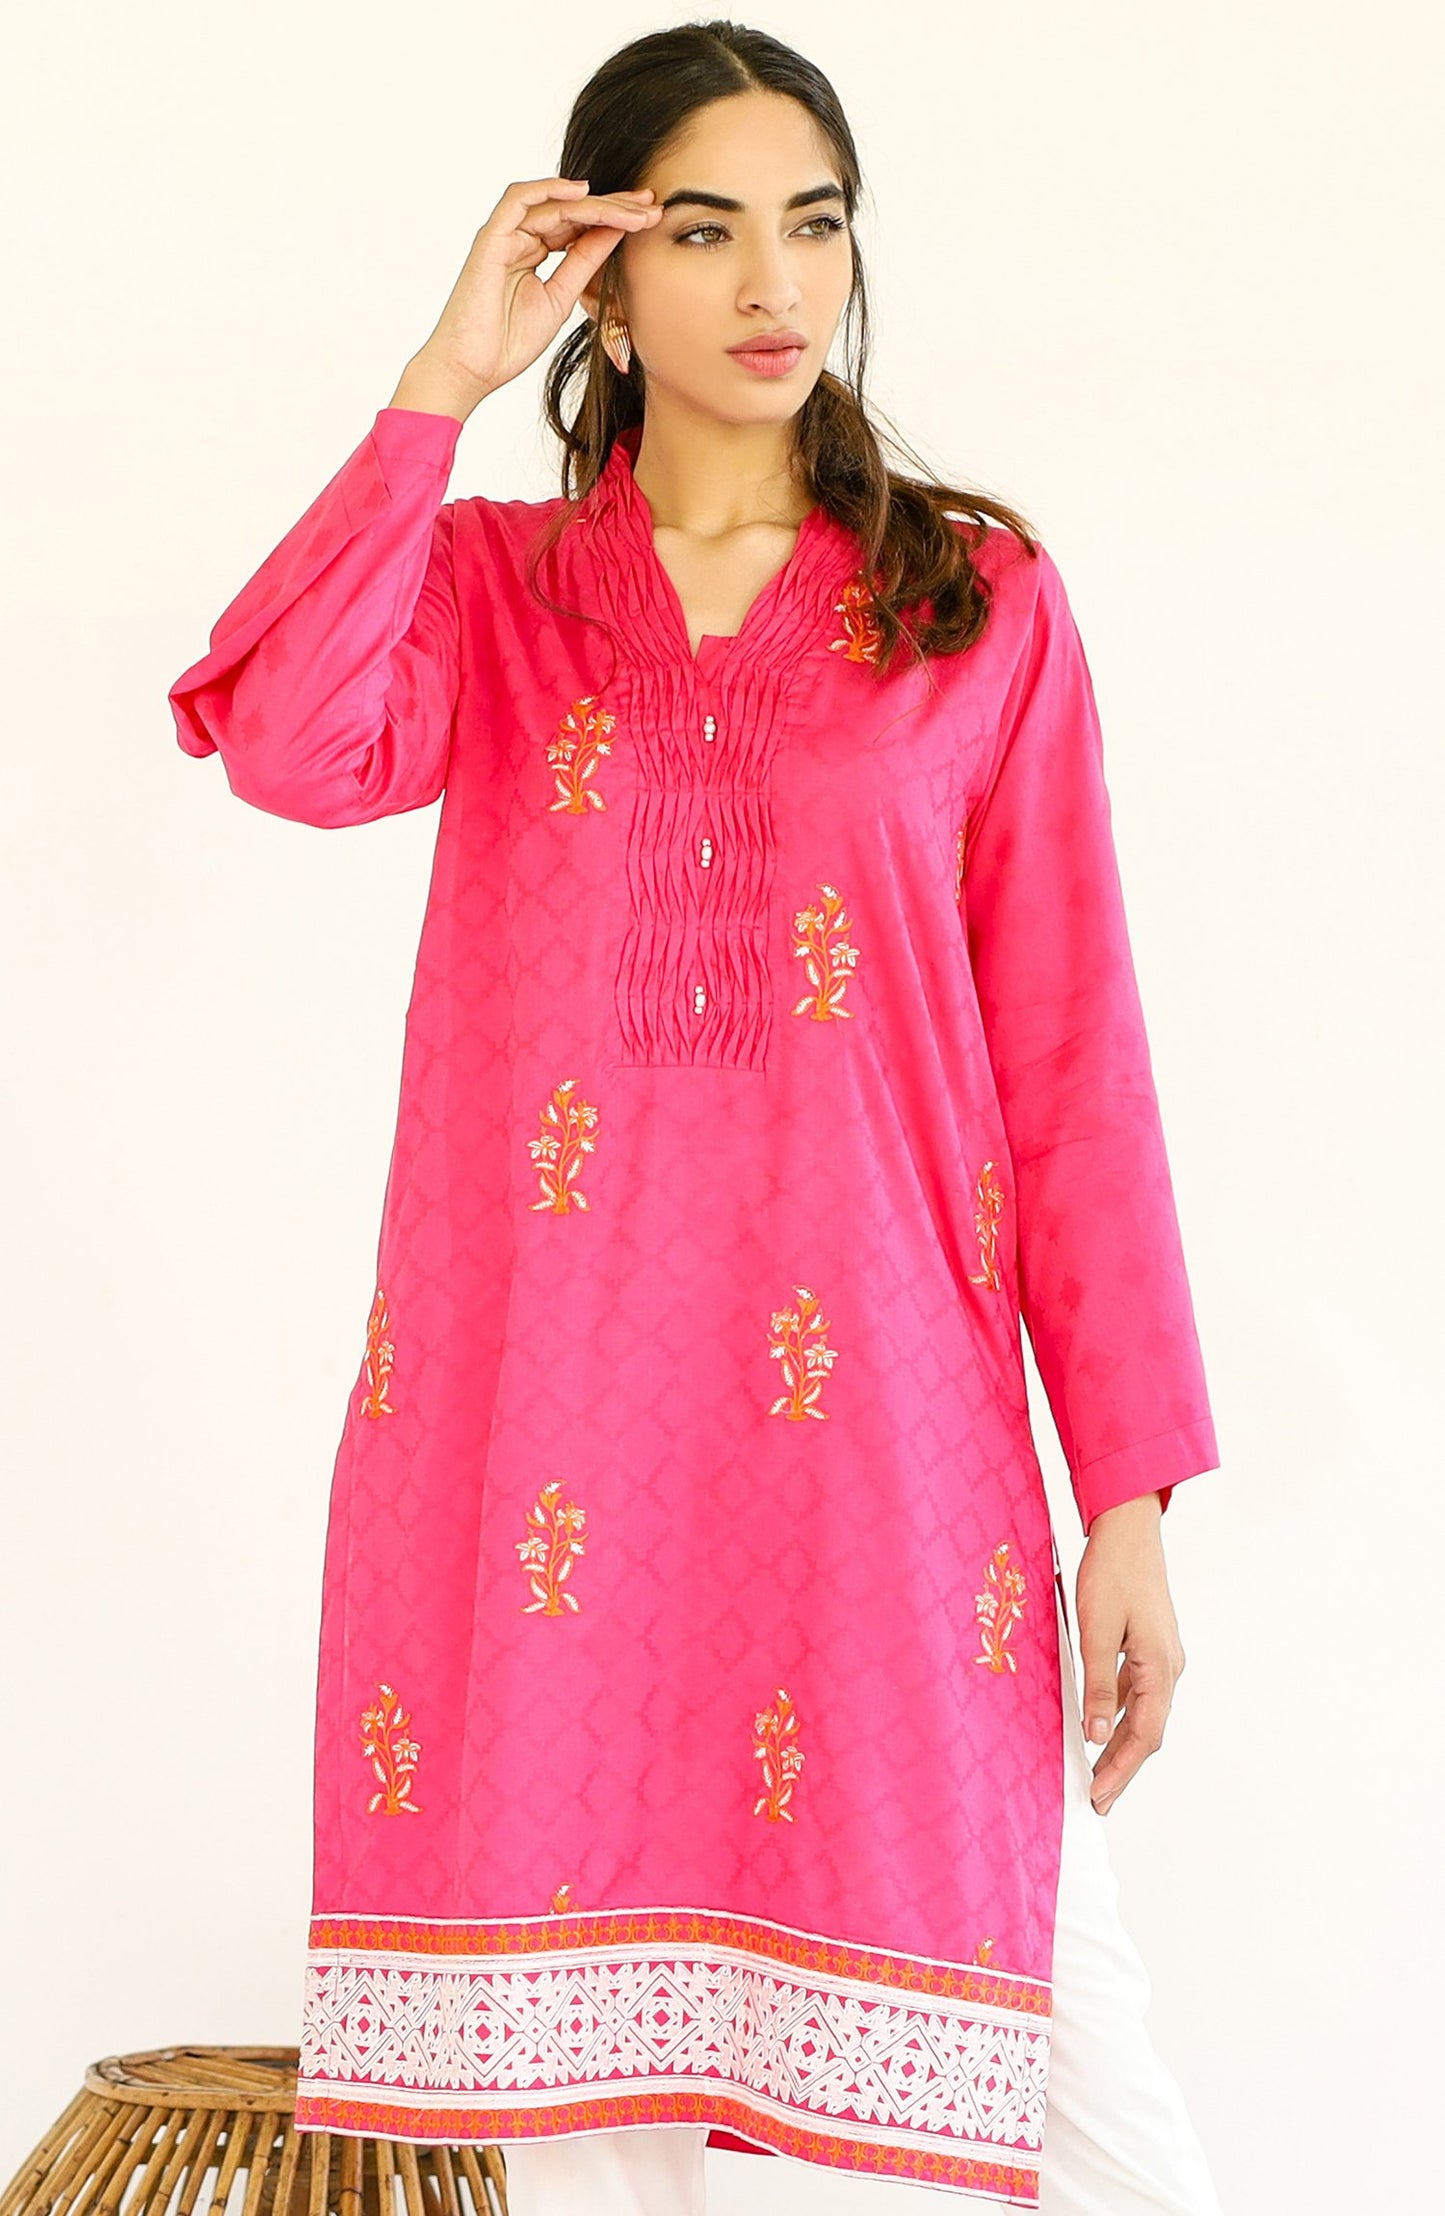 Stitched 1 Piece Embroidered Jacquard Shirt (nrds-116)